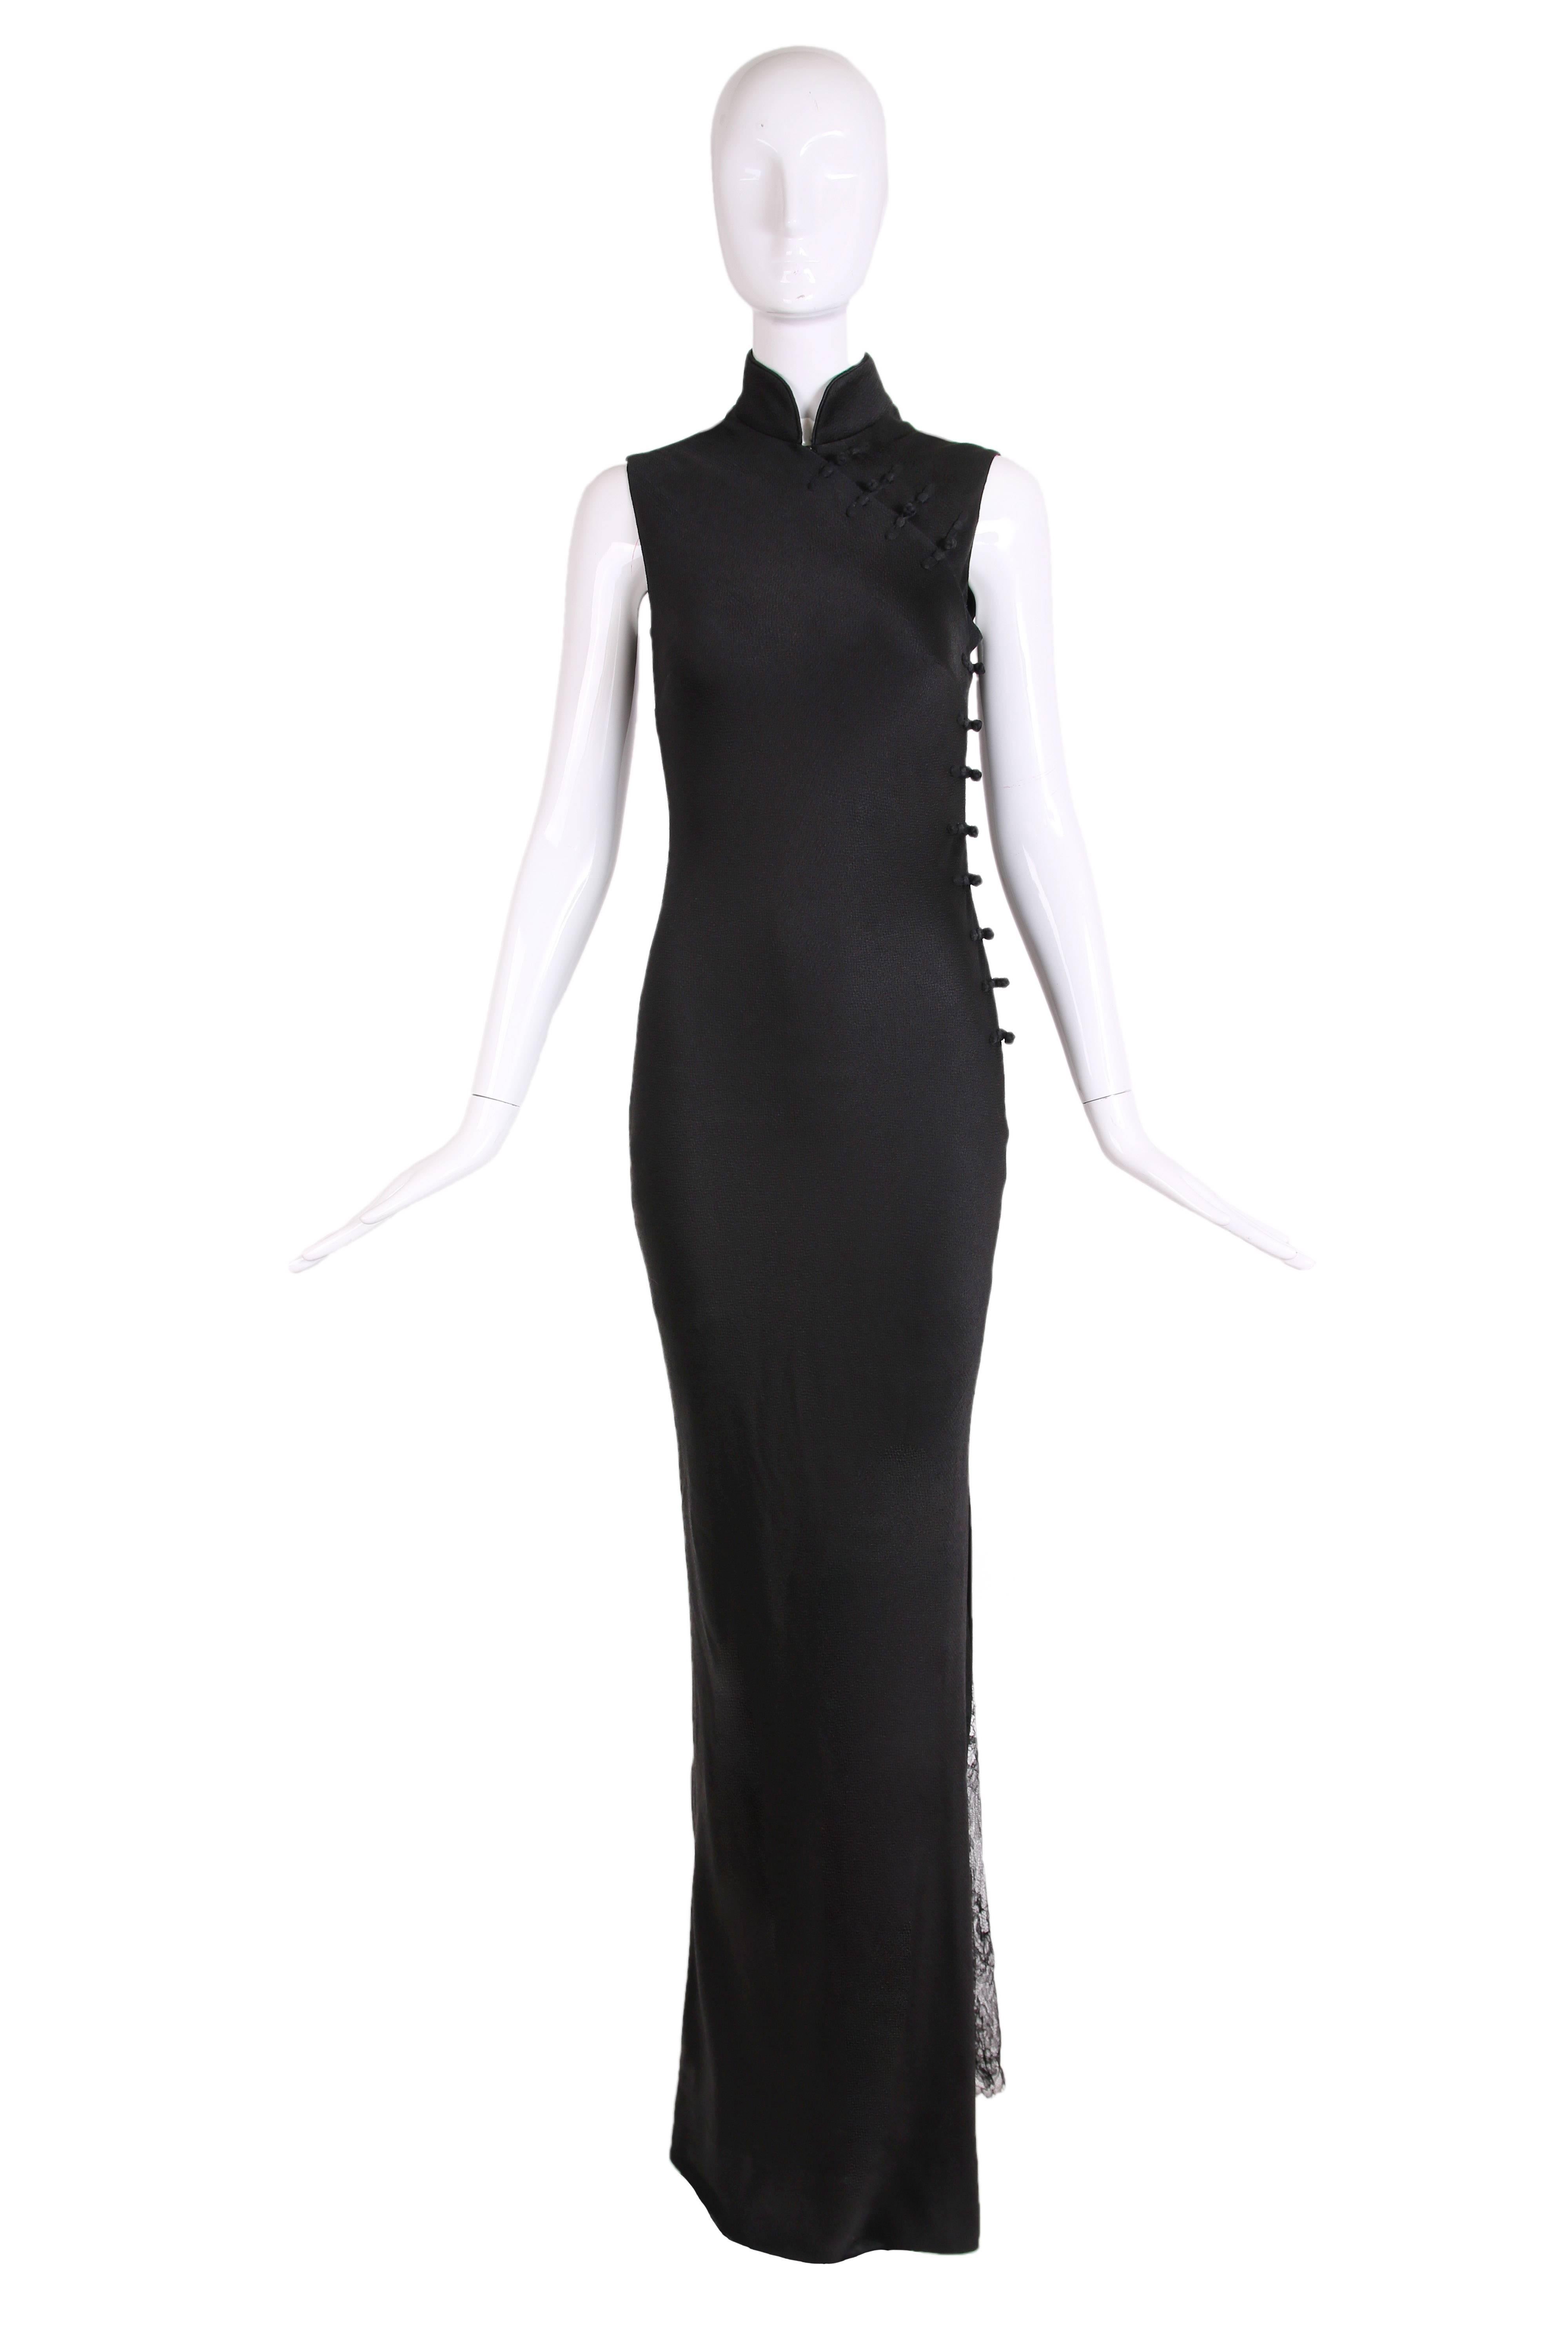 Christian Dior by Galliano Black Sleeveless Evening Gown w/Lace Inset Side Slit In Excellent Condition In Studio City, CA